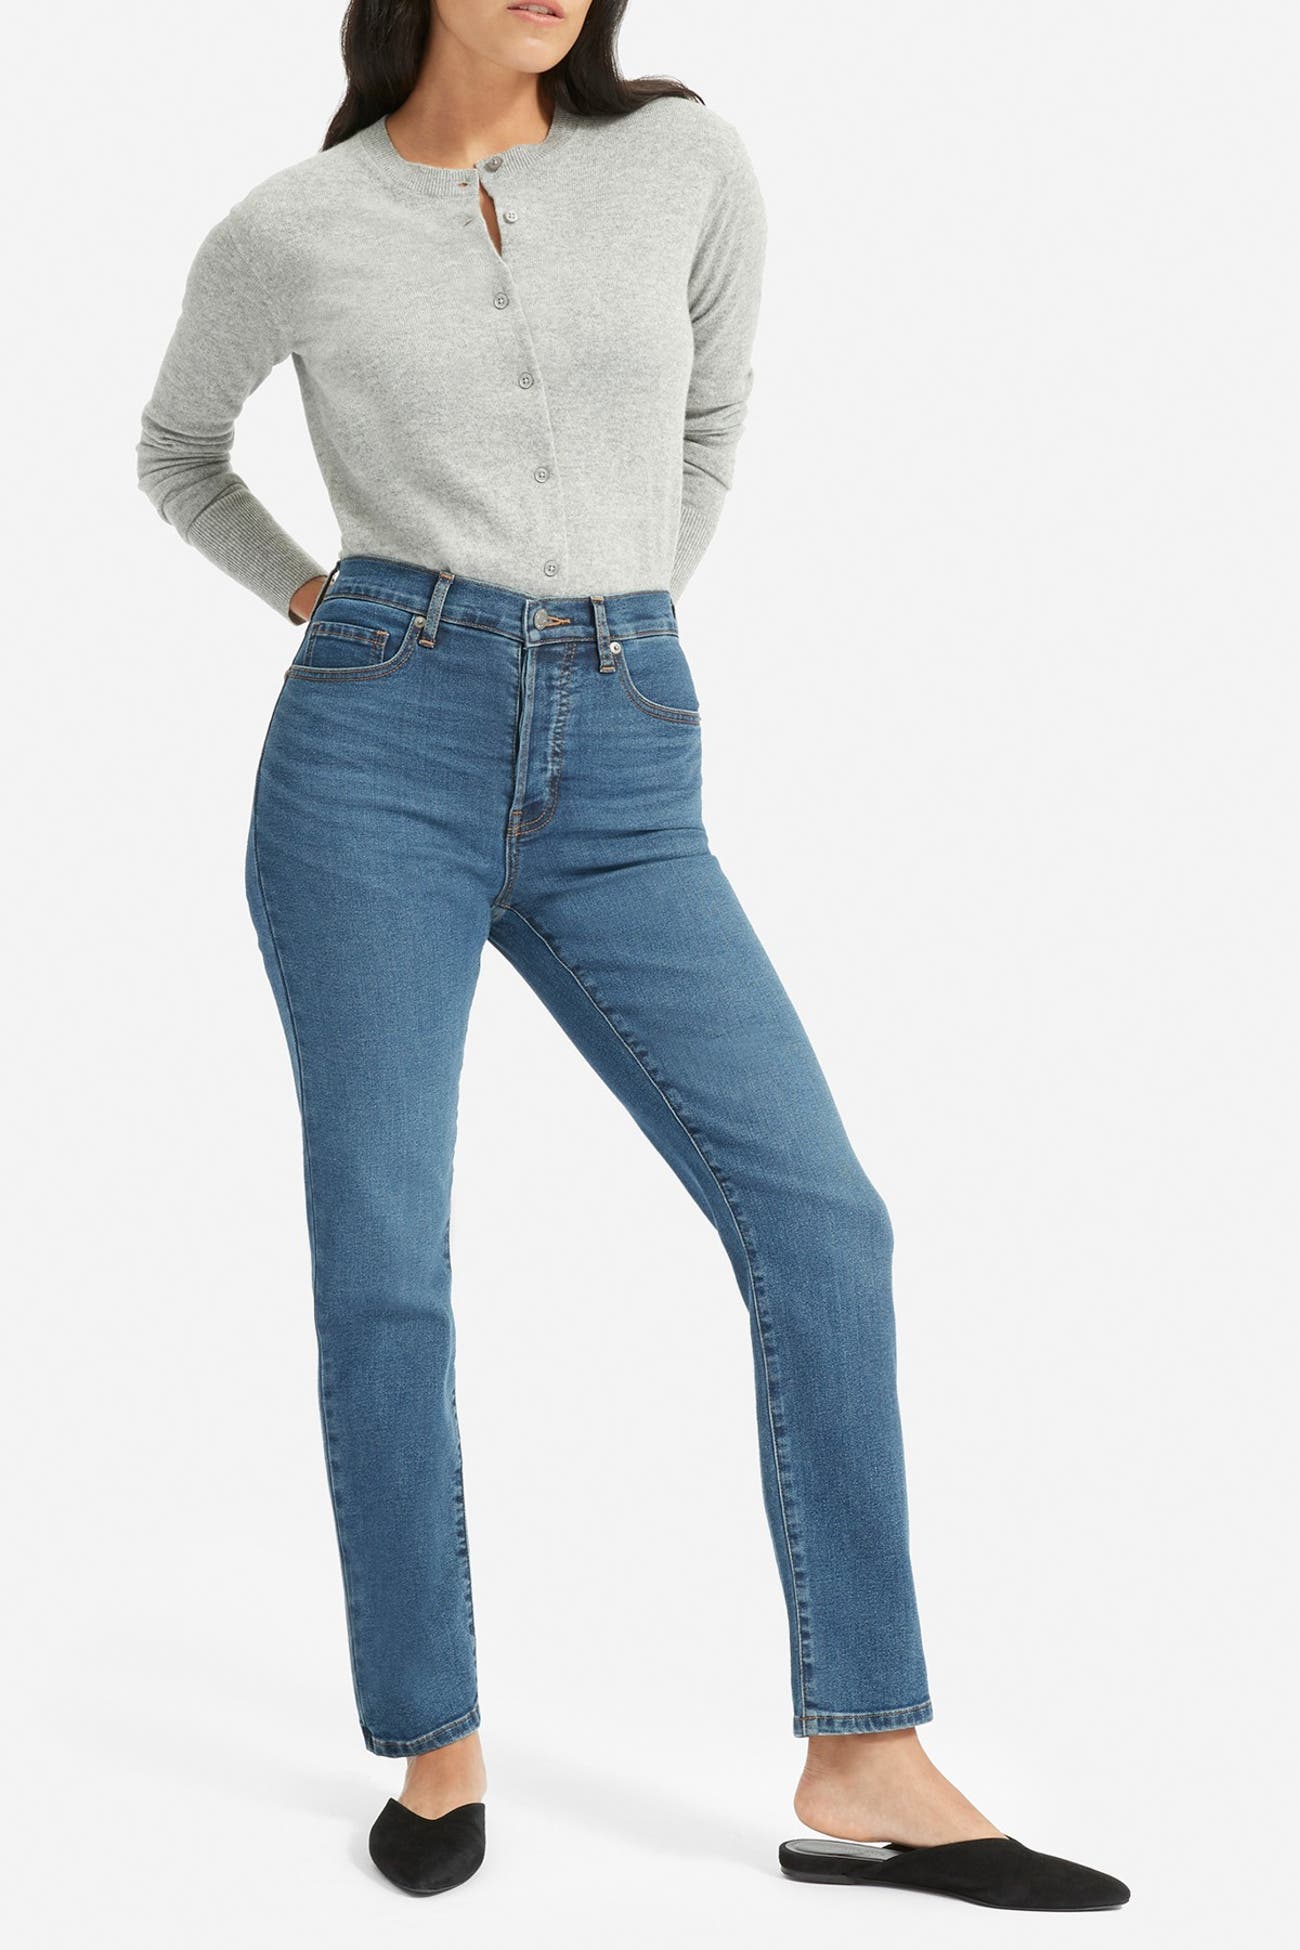 EVERLANE | The Authentic Stretch High-Rise Cigarette Jeans | Nordstrom Rack